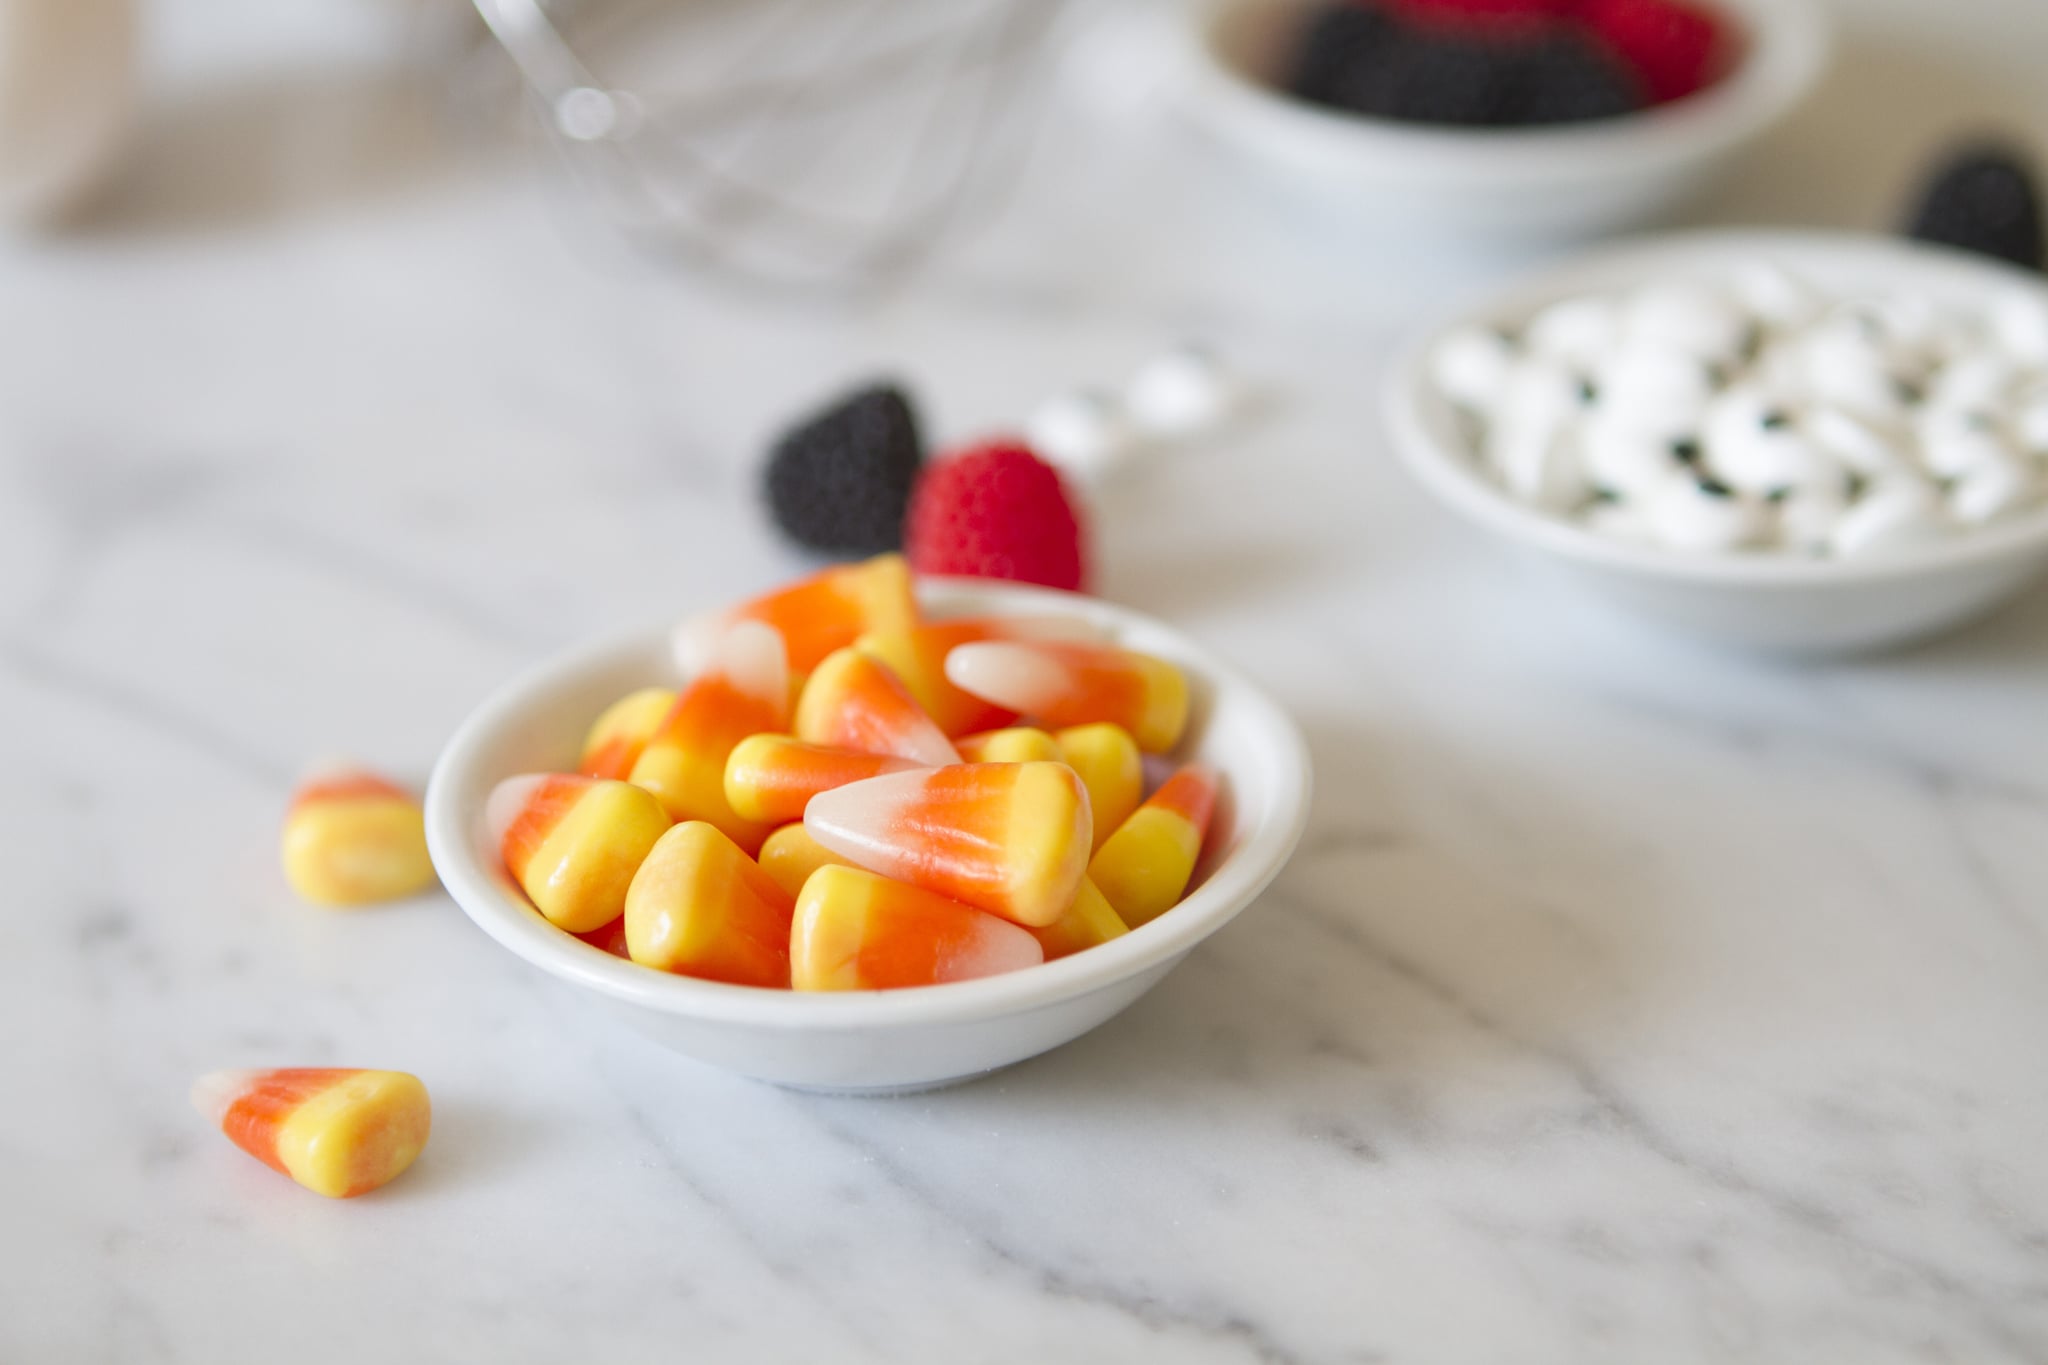 PopsugarLivingBudget TipsCheap Halloween CandyTrick or Treat! Where to Score Cheap Halloween CandyOctober 26, 2015 by Lisette MejiaFirst Published: September 25, 2013154 SharesChat with us on Facebook Messenger. Learn what's trending across POPSUGAR.Nobody wants to be the one person on the block who doesn't hand out Halloween candy. If price is a factor that might make you skip out on the trick-or-treat tradition (or you just want to save a bundle for your costume bash), listen up! All of these places offer affordable sweets for neighborhood kids or partygoers to enjoy. Sweet tooths everywhere — and your wallet — will thank you.Your kitchen: From caramel squares to chocolate truffles, making your own homemade candy will save you a bundle. It might take a little bit of time, but it will definitely get you in the holiday spirit.Online retailers: Consider sites like Candy Warehouse or Oriential Trading Company go-tos for the sweet stuff. Their prices are among the lowest out there, and they often come in fun - 웹